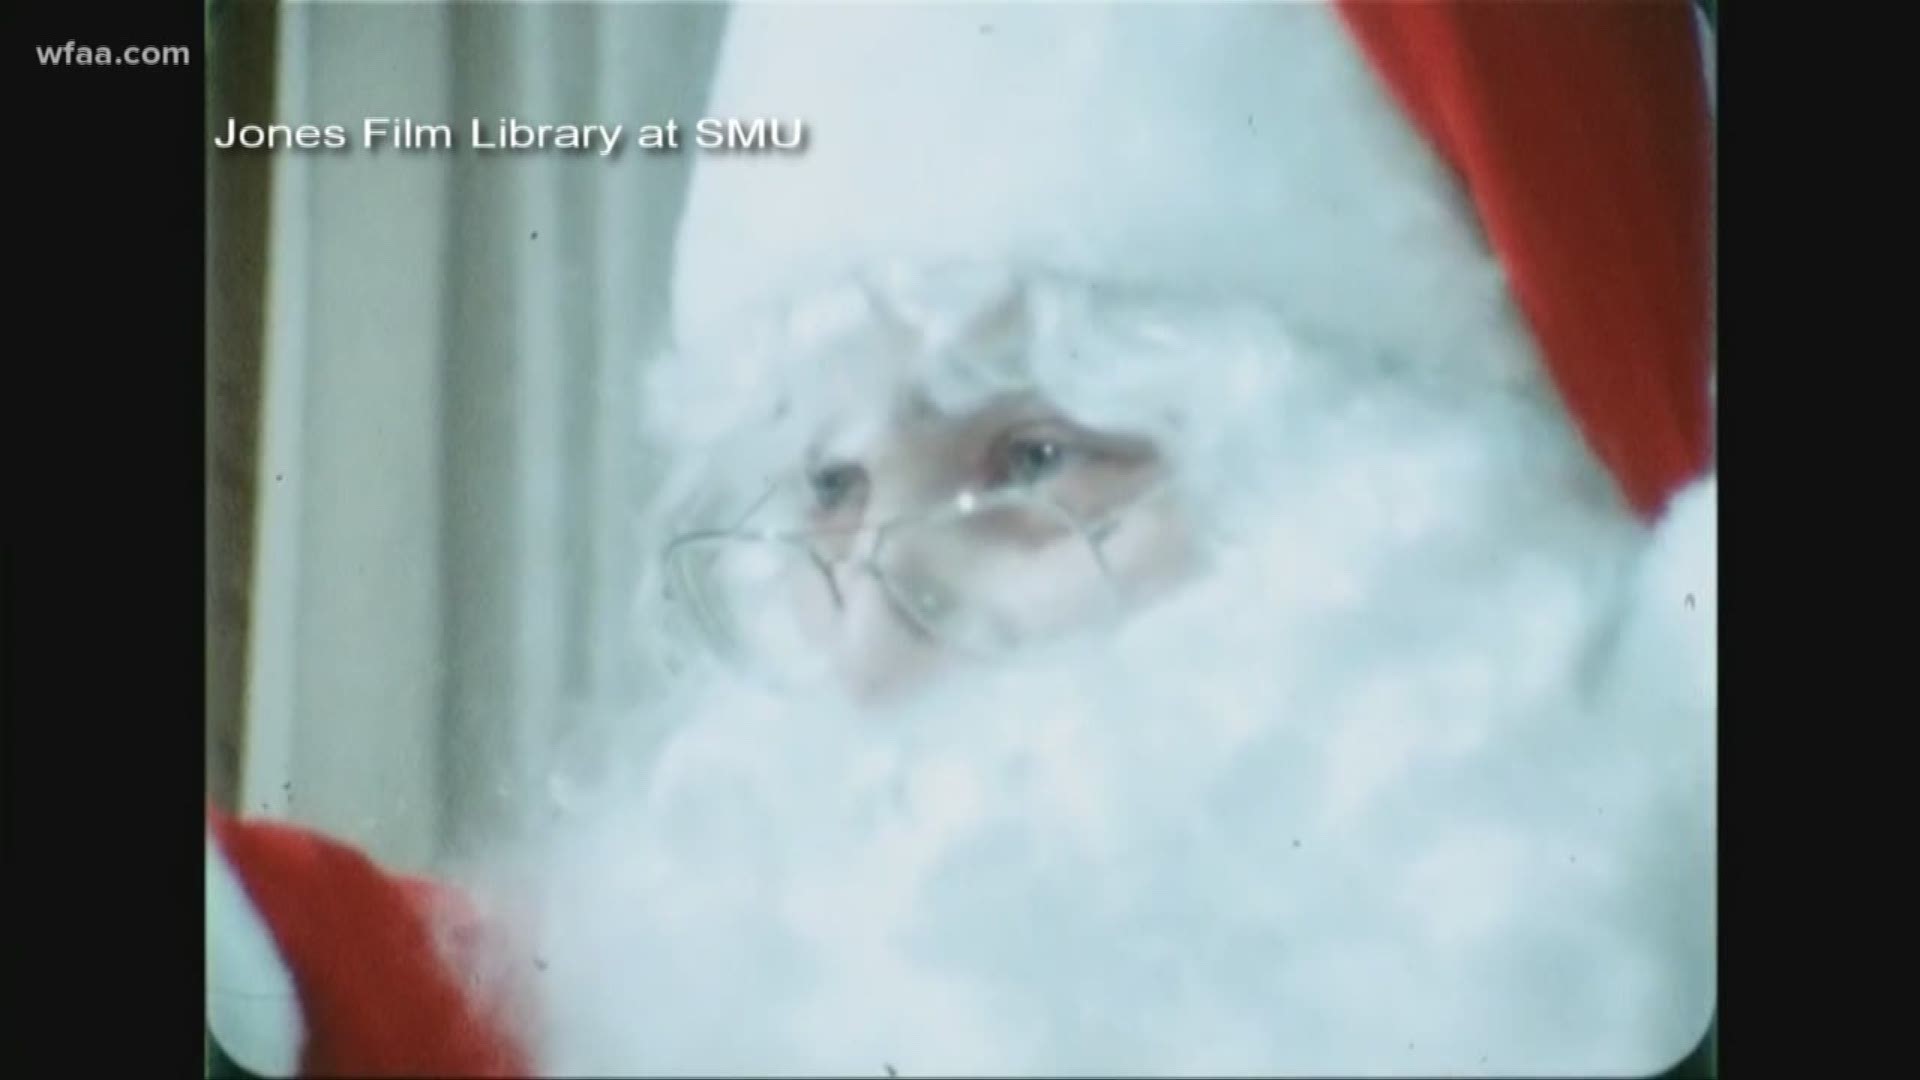 WFAA's Chris Sadeghi examines the tradition of mall Santas and how people prepare for the pivotal role.